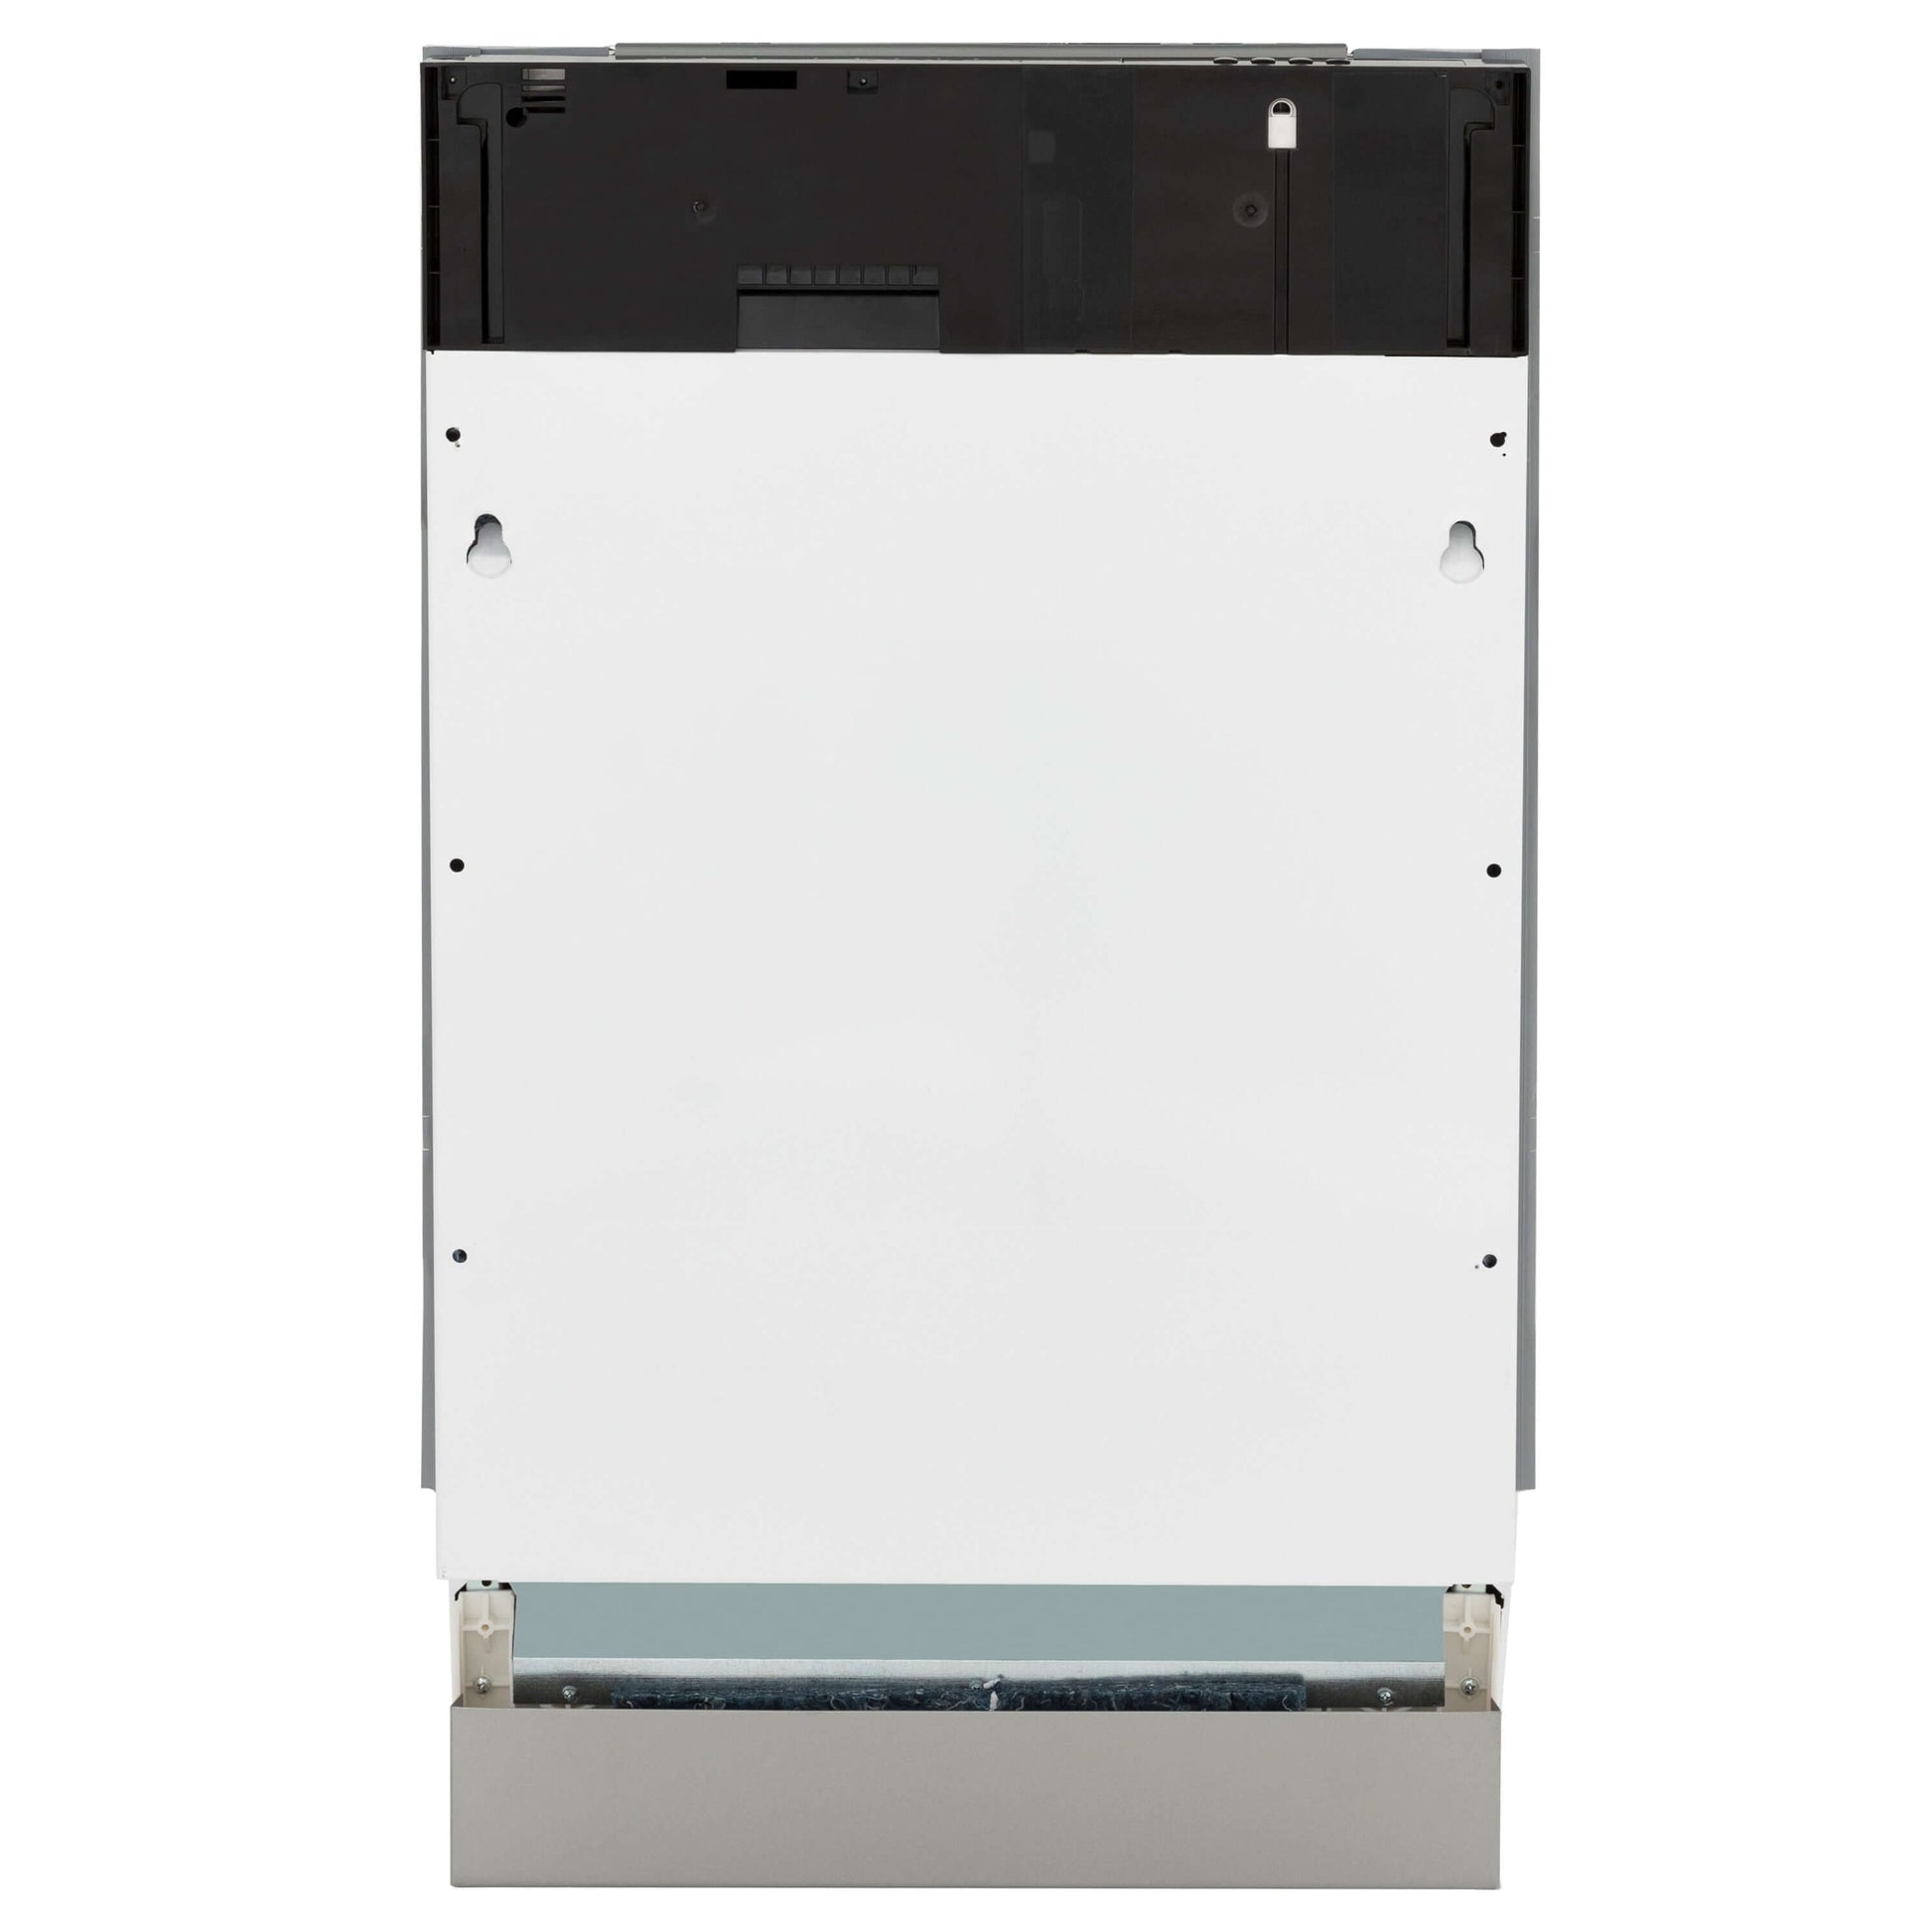 ZLINE 18 in. Tallac Series 3rd Rack Top Control Dishwasher in Custom Panel Ready with Stainless Steel Tub, 51dBa (DWV-18) front.